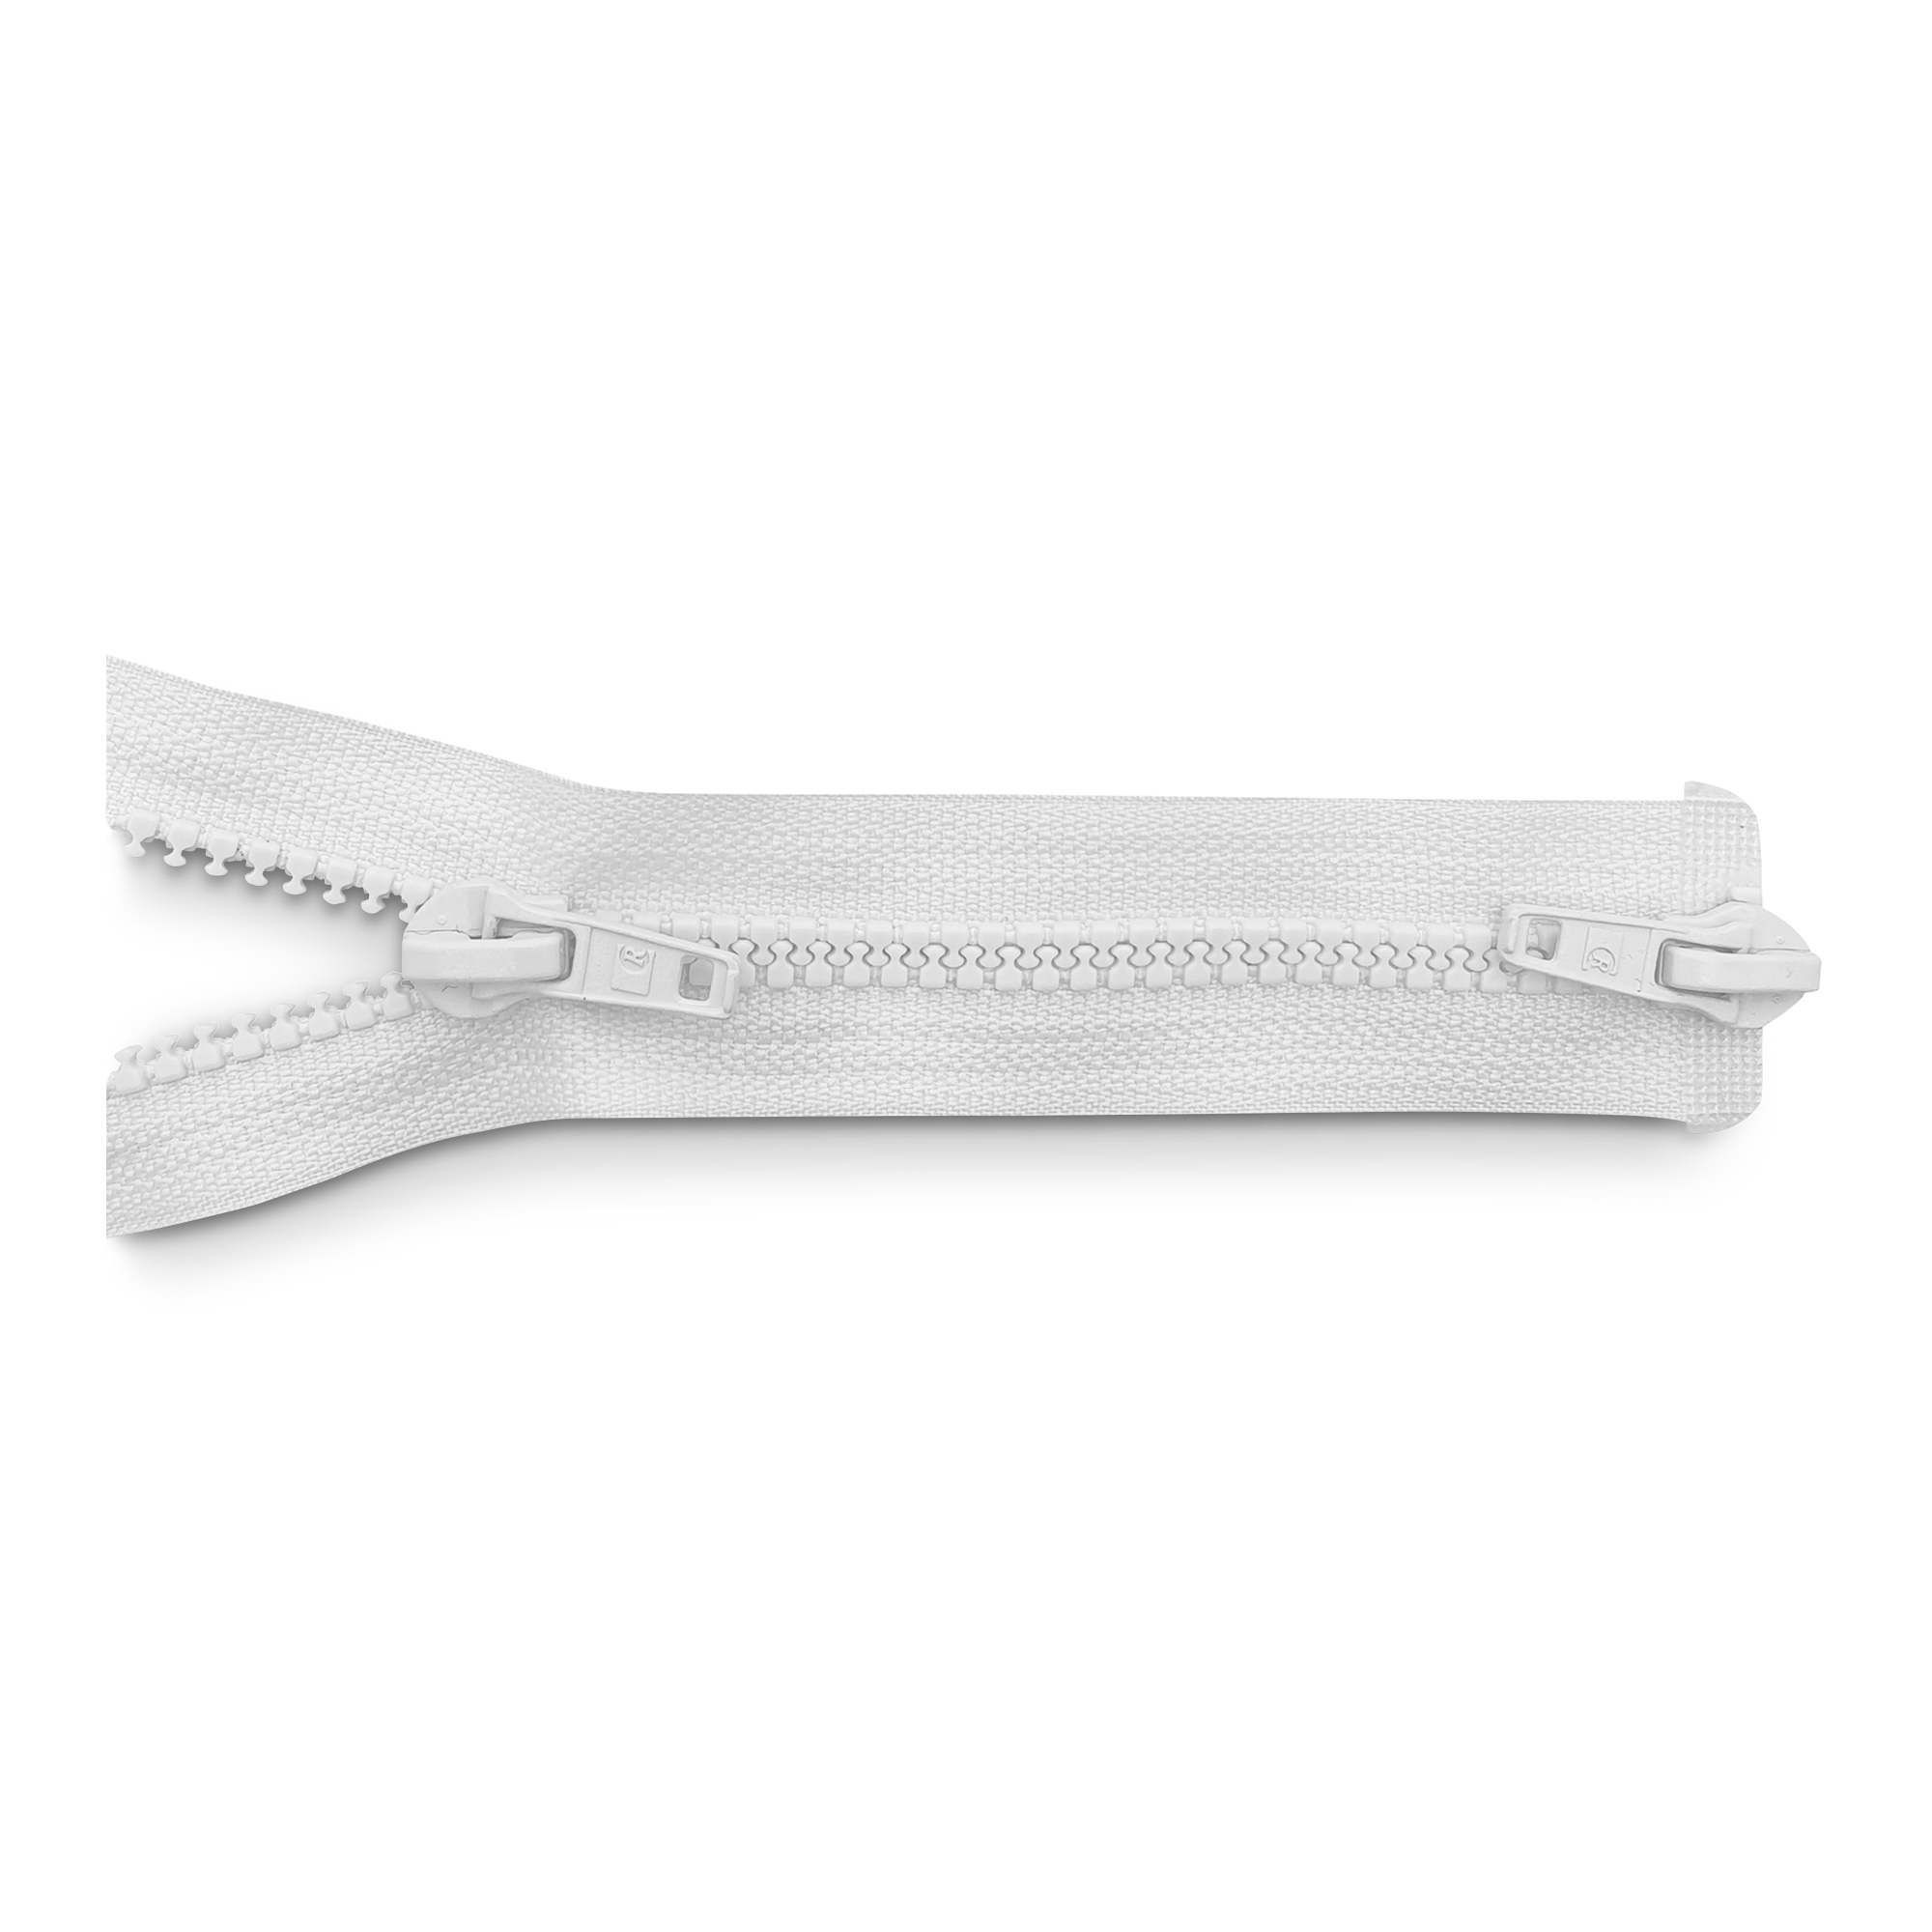 zipper 100cm,  divisible, 2way, molded plastic, wide, pure white